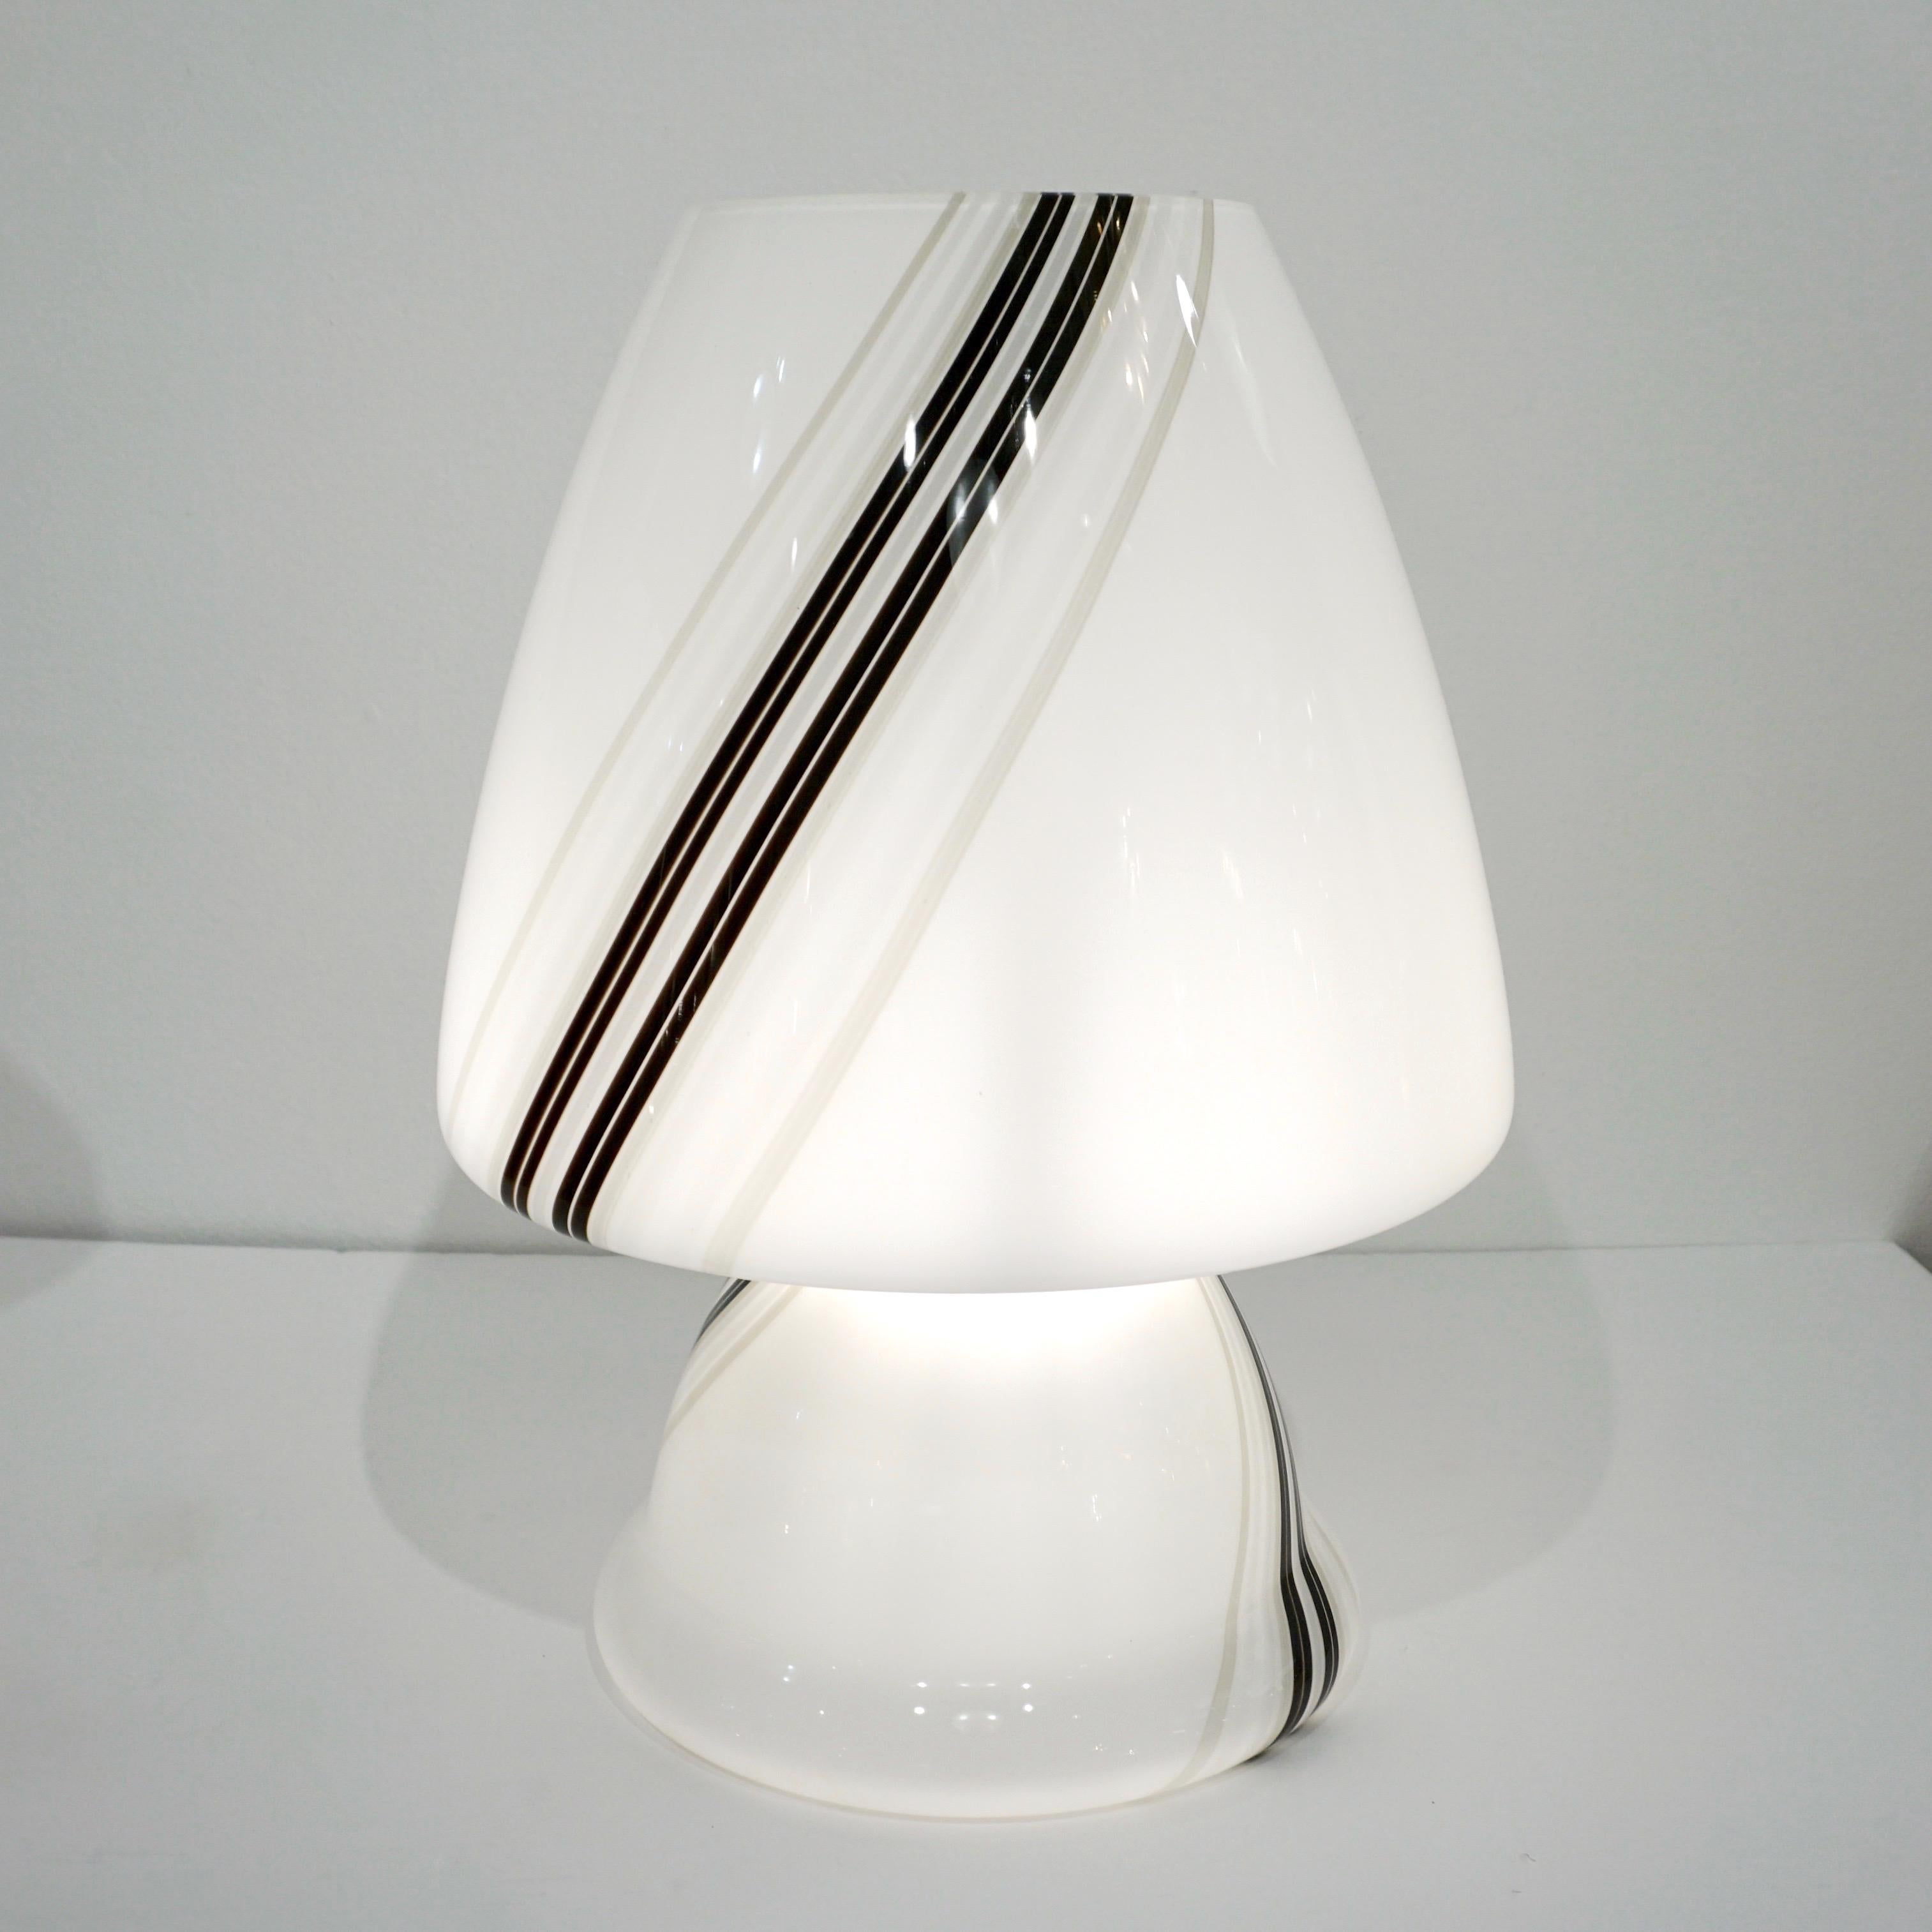 Vintage 1970s Italian Large White Lamp with Black Murrine Attributed to Vistosi For Sale 1